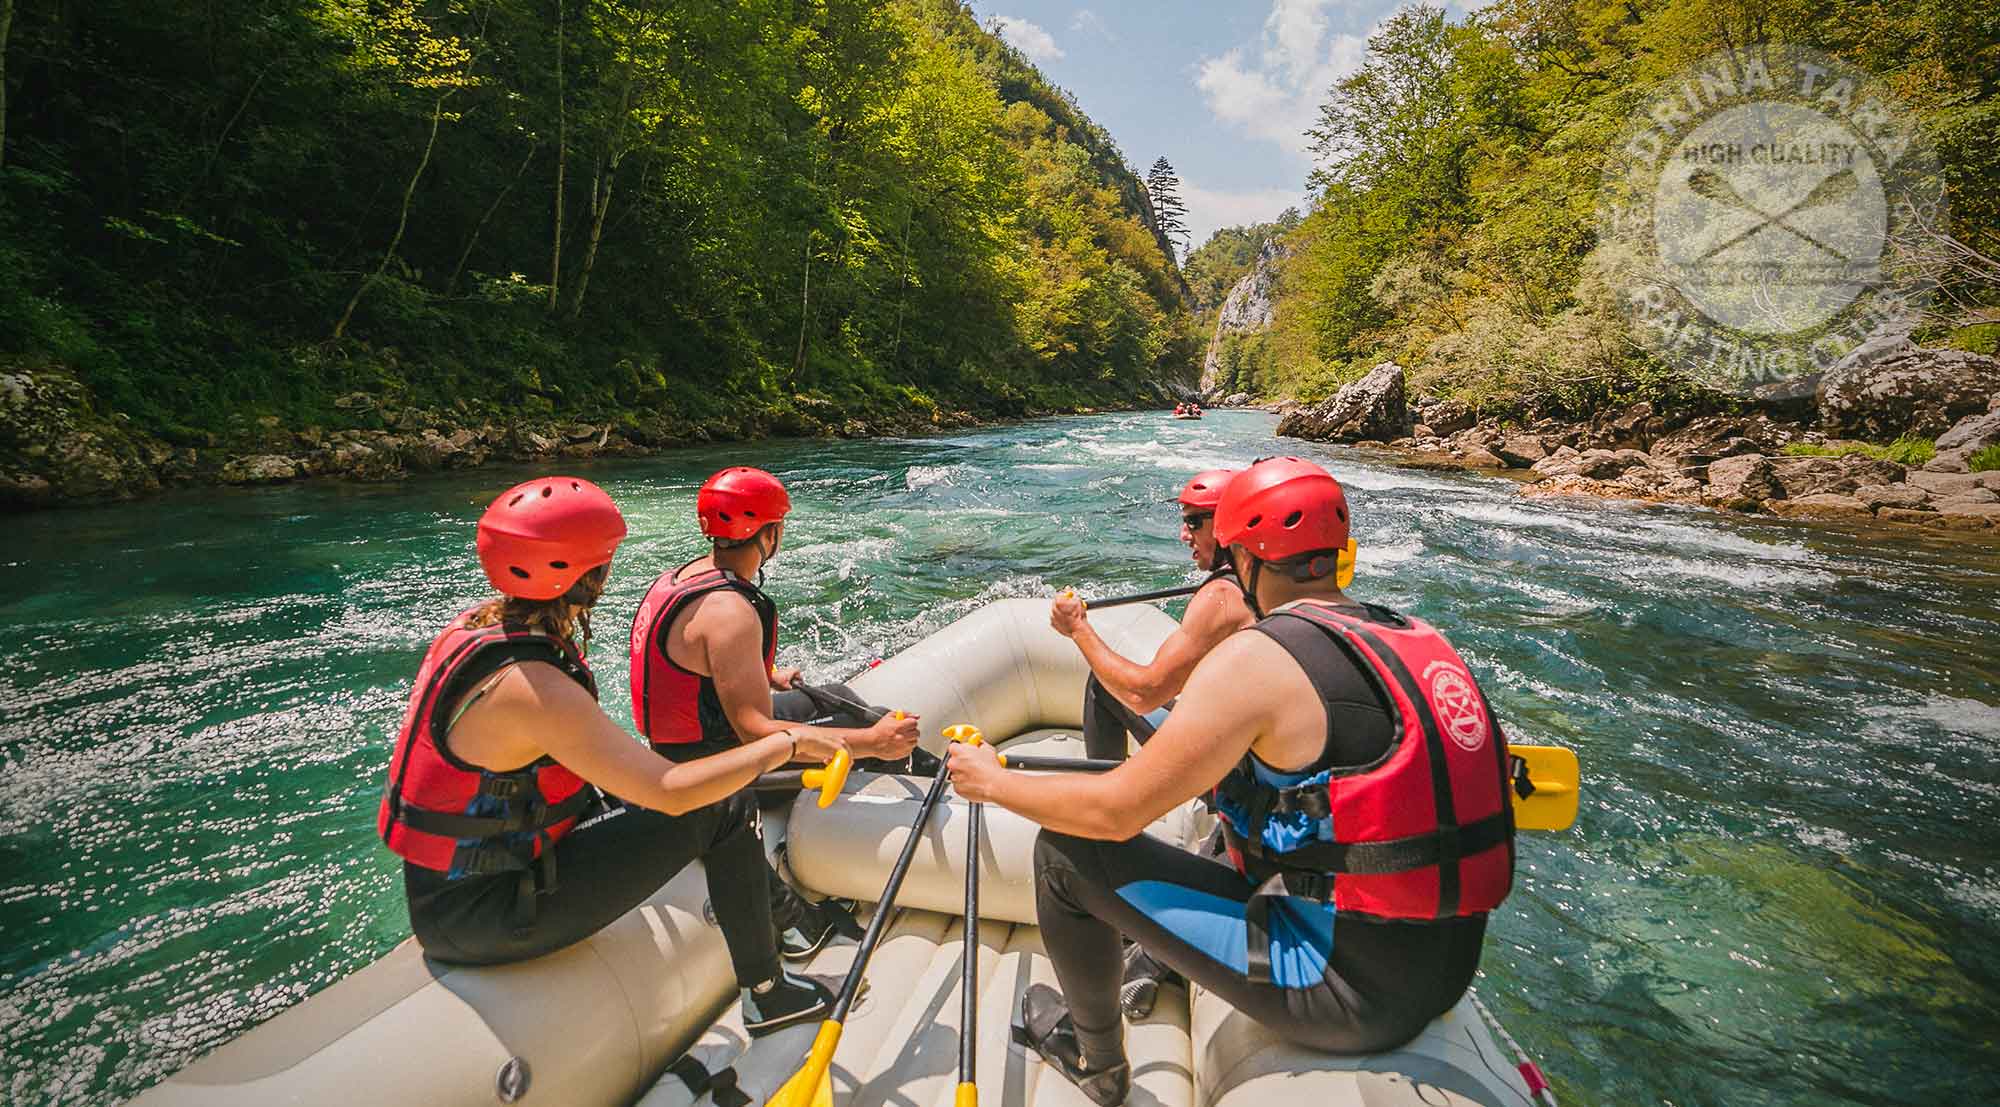 How to Prepare Yourself for The Rafting on the Tara and Drina Rivers - Tips and Recommendations